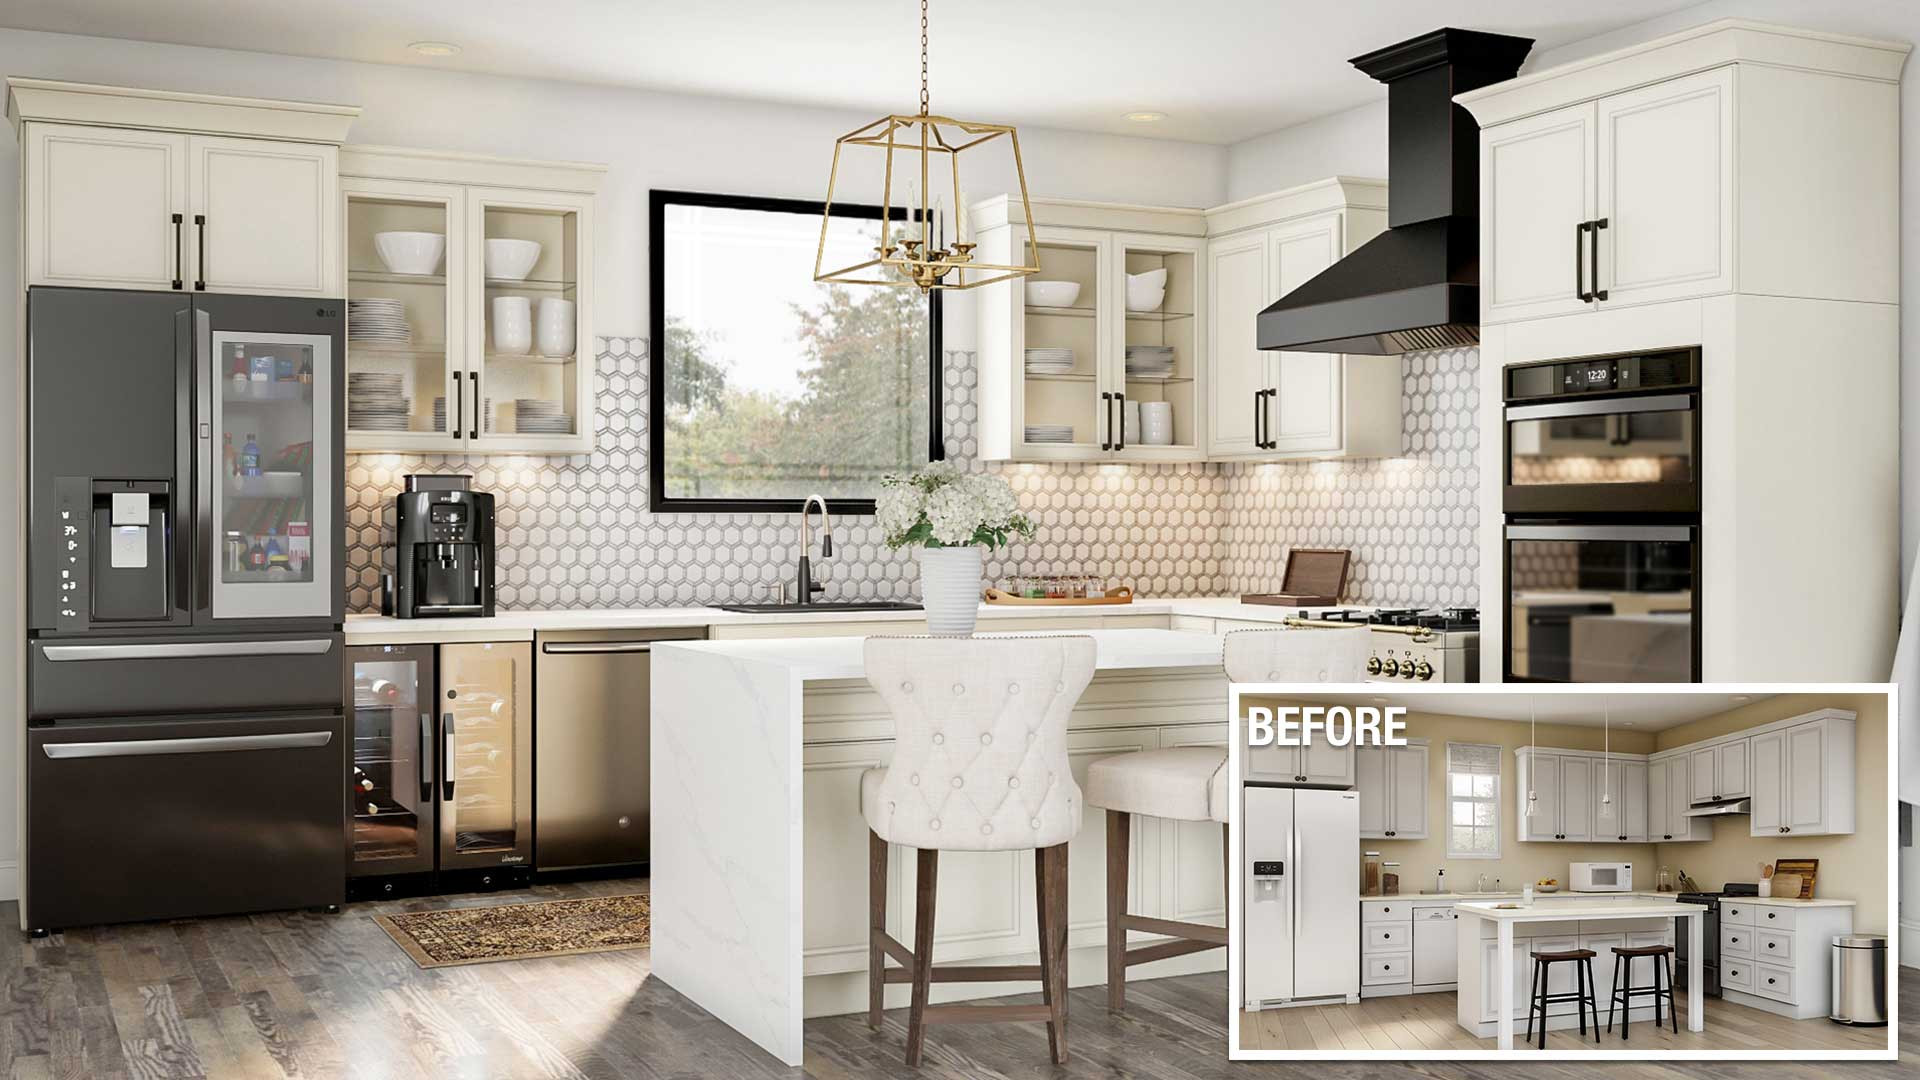 Kitchen Remodel Home Depot
 Cost to Remodel a Kitchen The Home Depot